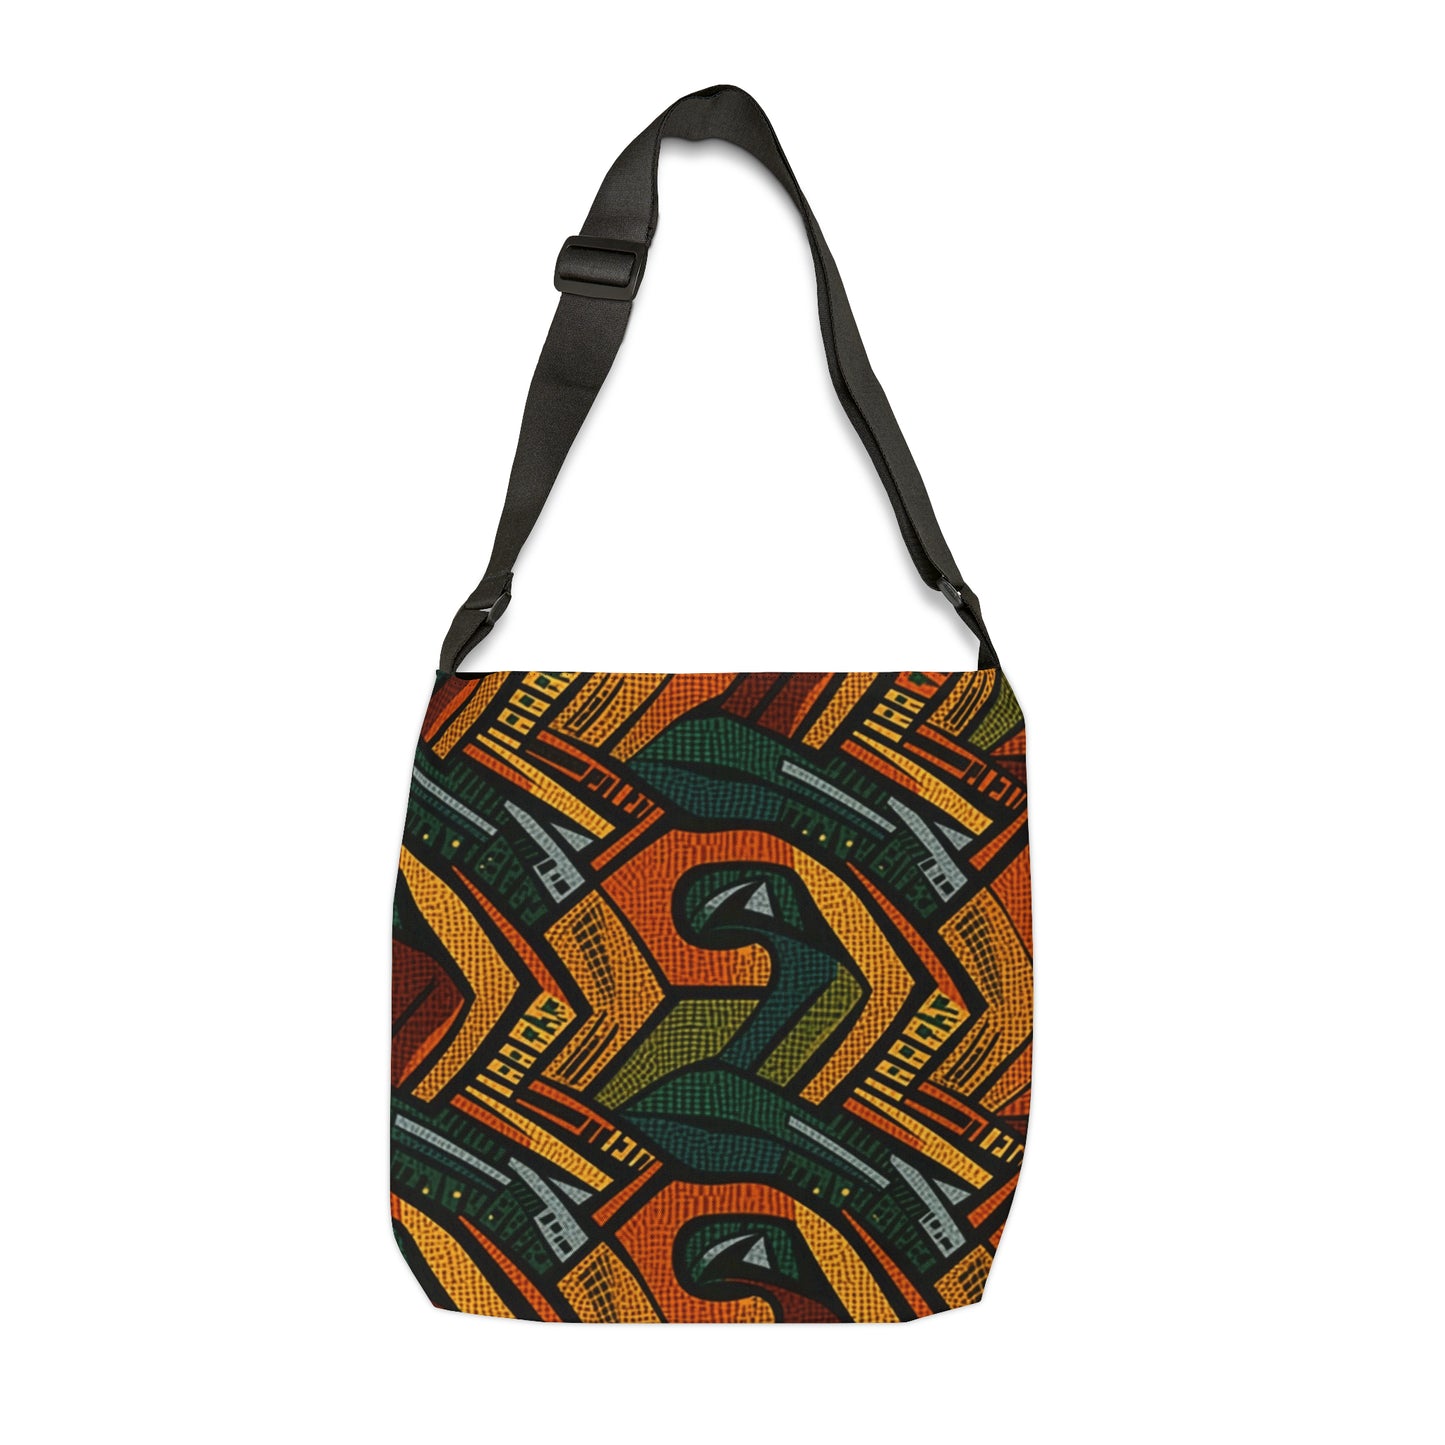 1960-1970s Style African Ornament Textile - Bold, Intricate Pattern - Adjustable Tote Bag (AOP)